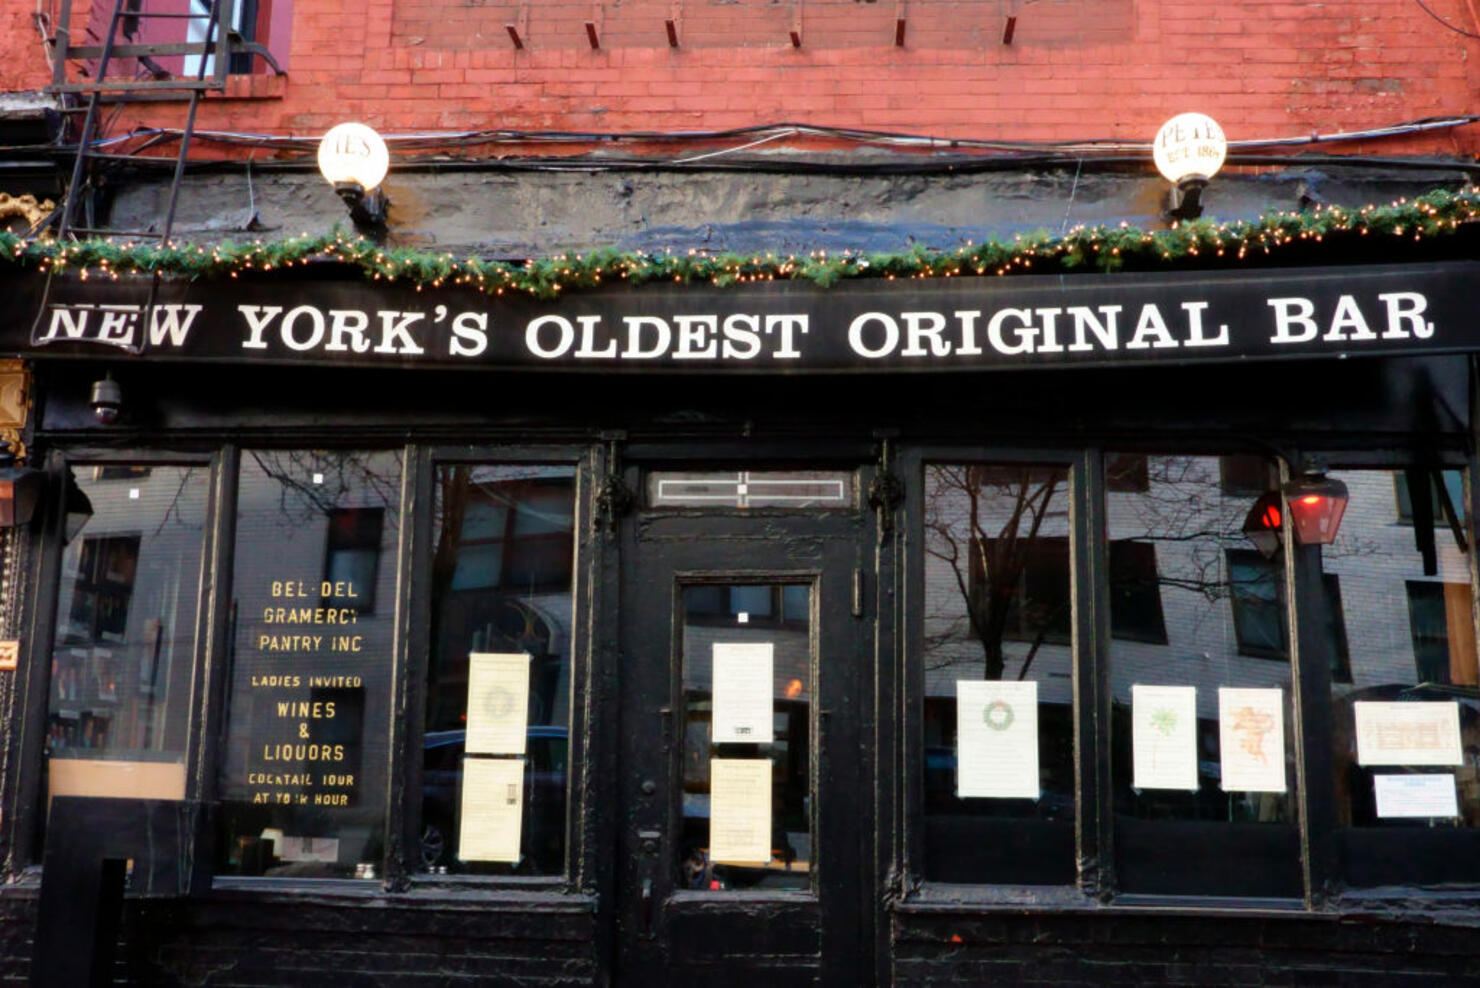 Pete's Tavern, one of the cities oldest drinking establishments built in 1864, Gramercy Park, Manhattan